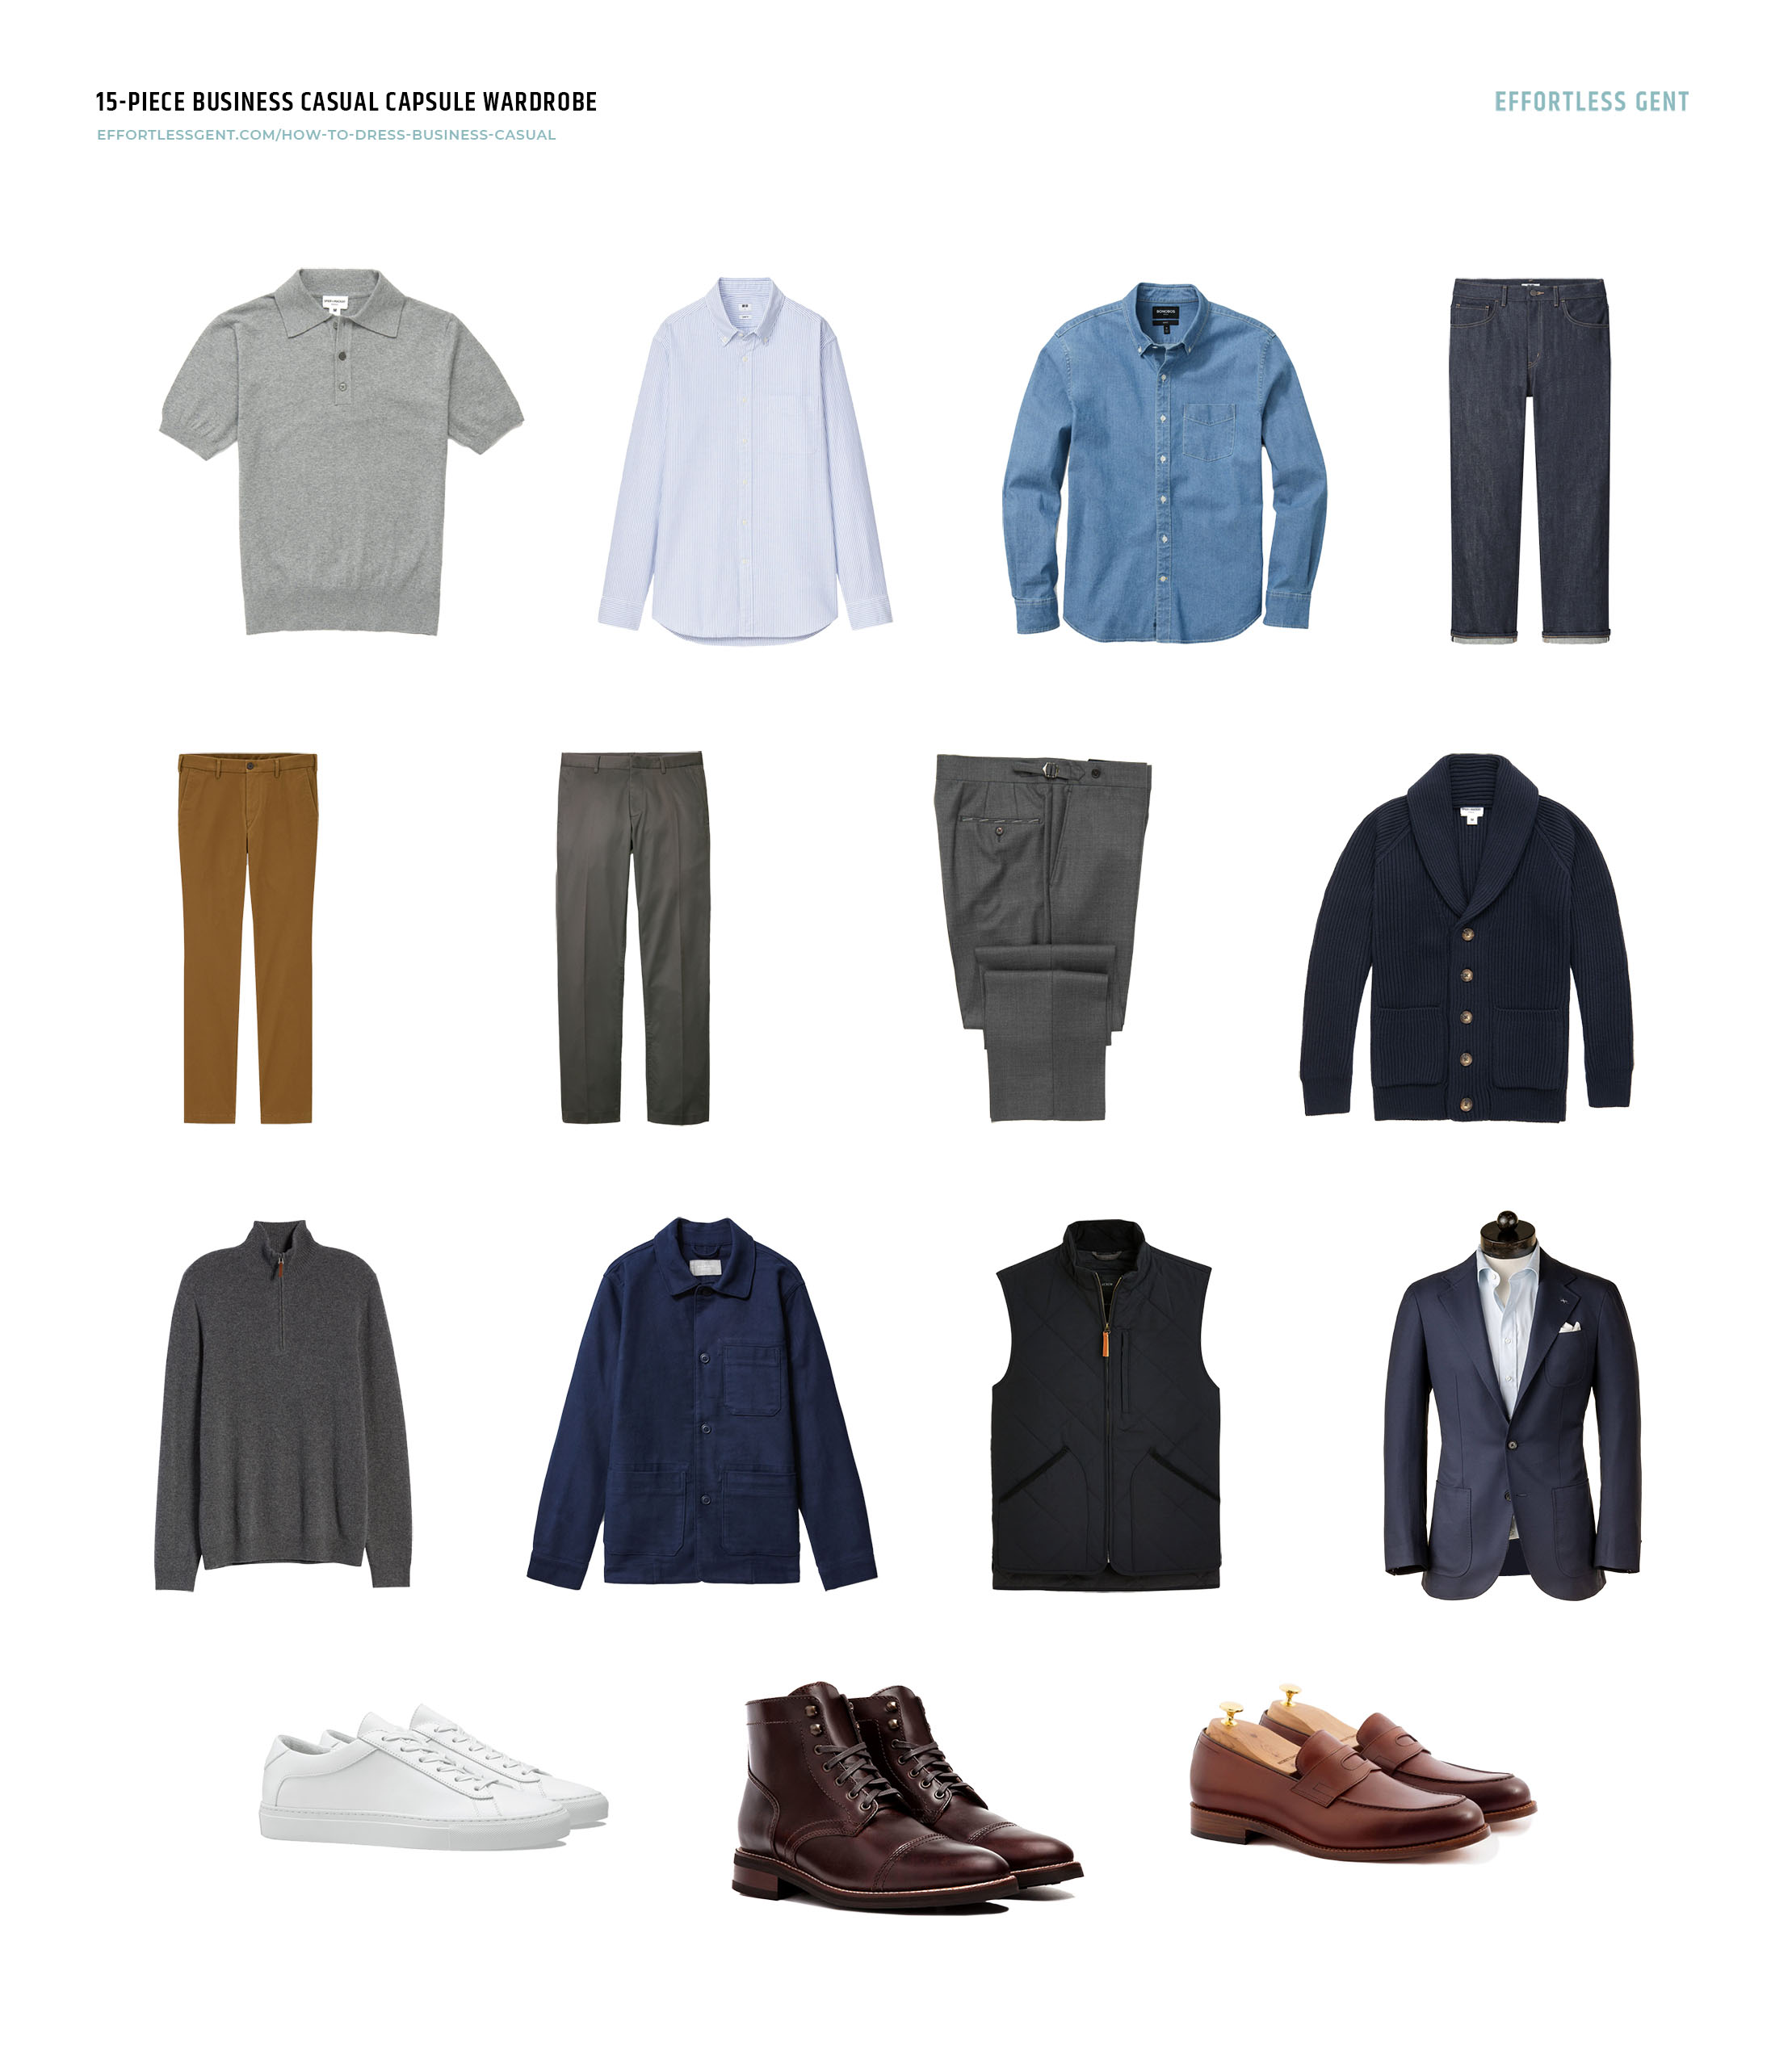 flatlay of all business casual capsule wardrobe items in this article